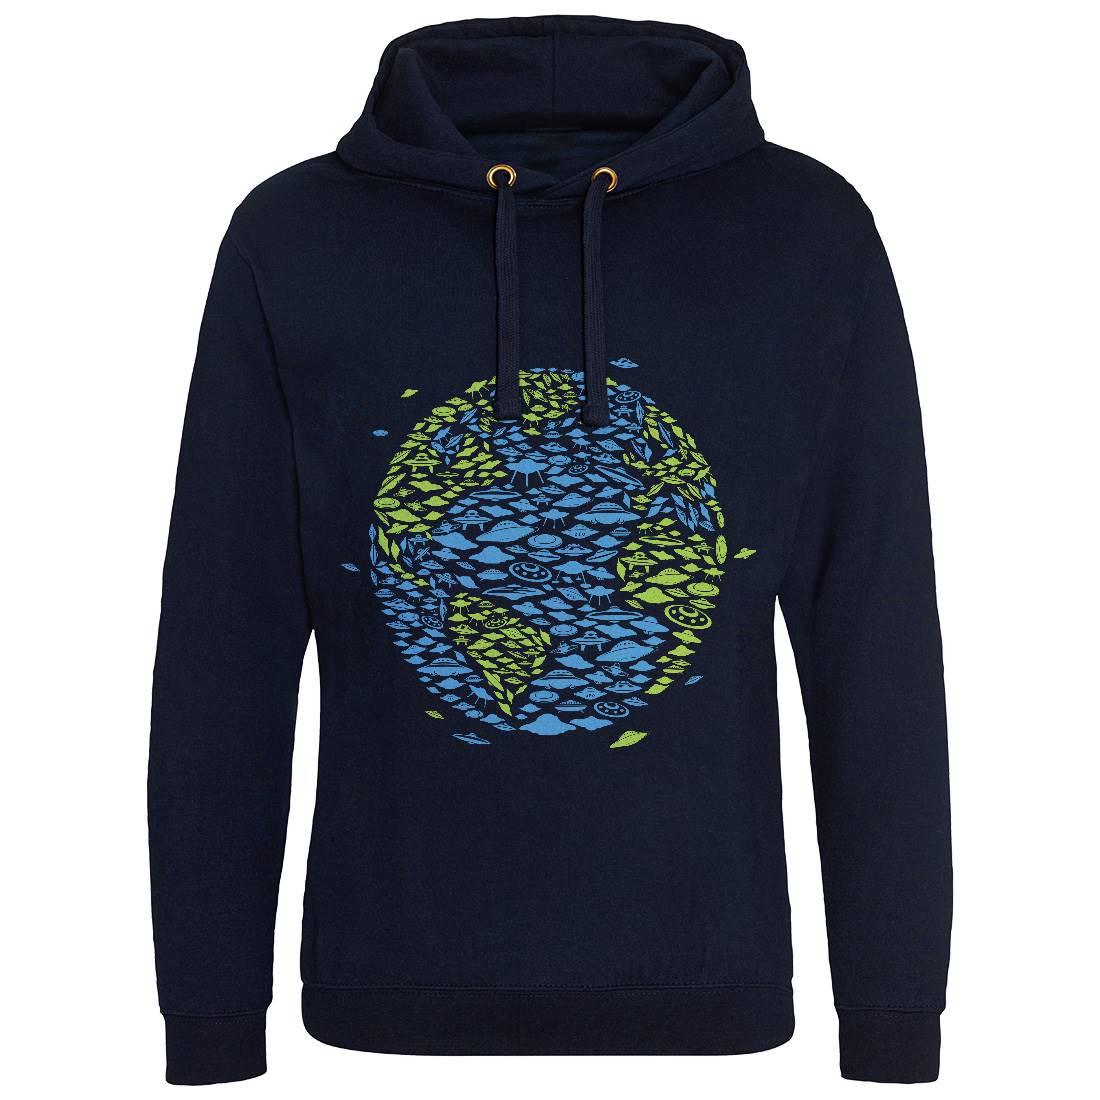 Ufo Invasion Mens Hoodie Without Pocket Space B092